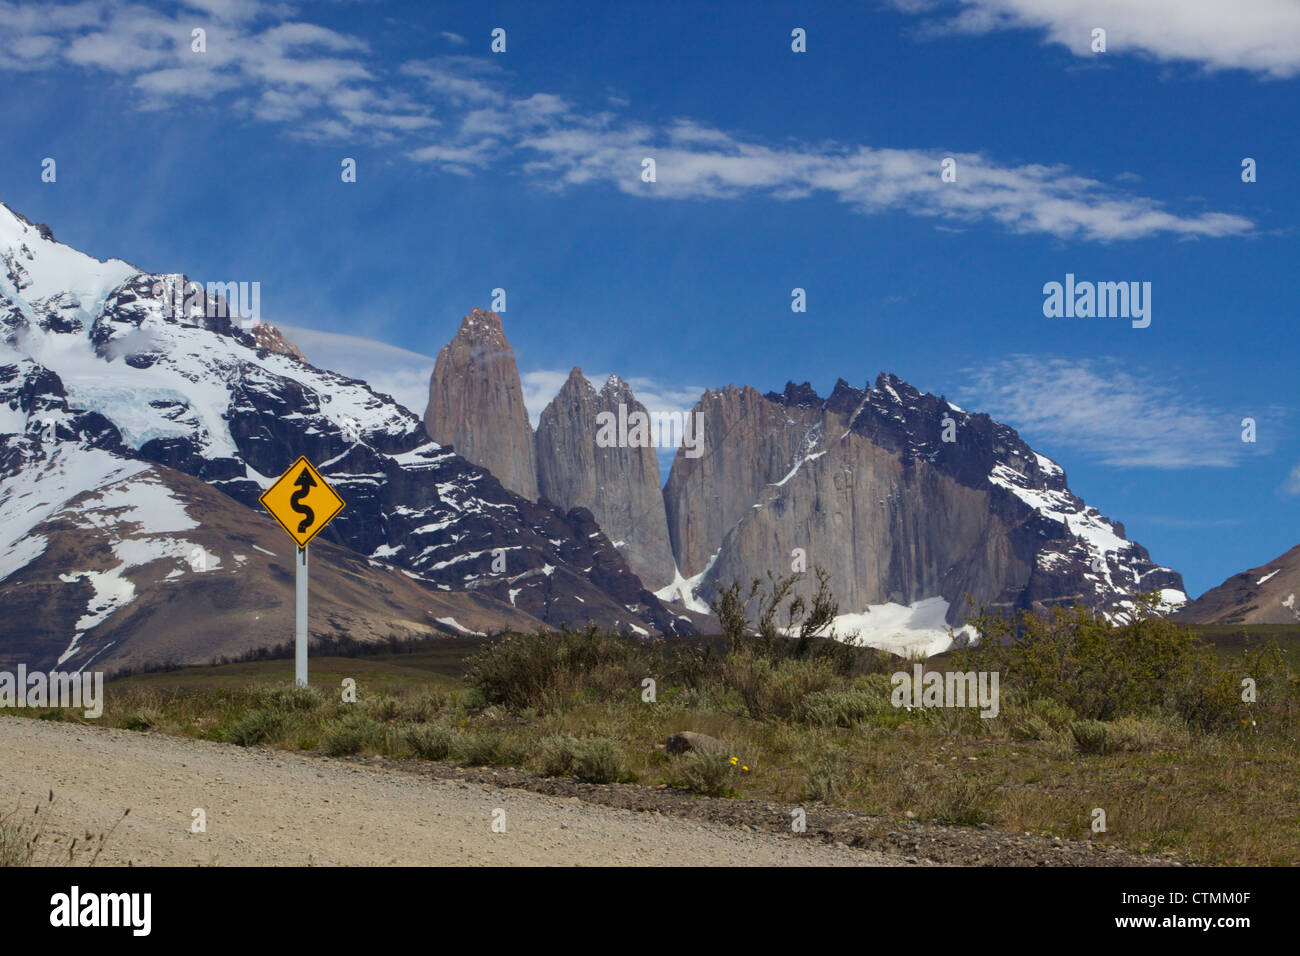 A tourist's roadside view of the Torres del Paine, Torres del Paine National Park, Patagonia, Chile, South America Stock Photo